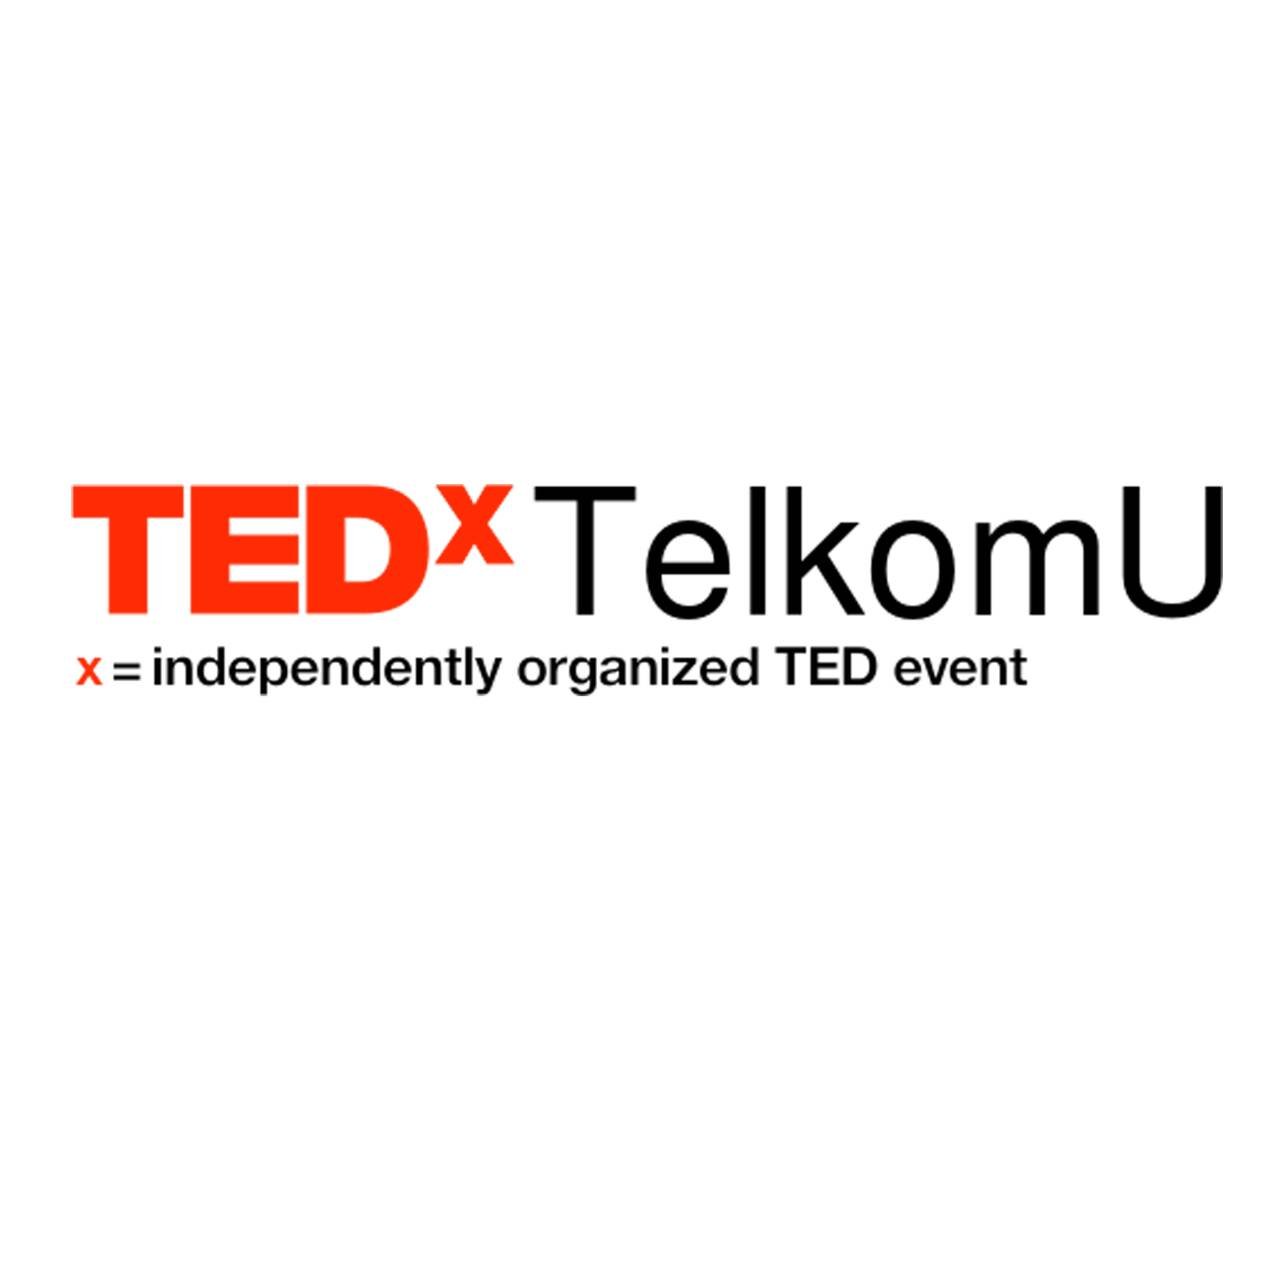 Independently organized TEDx event in Telkom University (formerly known as TEDxITT) | contact: tedxtelkomu@gmail.com || info@tedxtelkomu.com